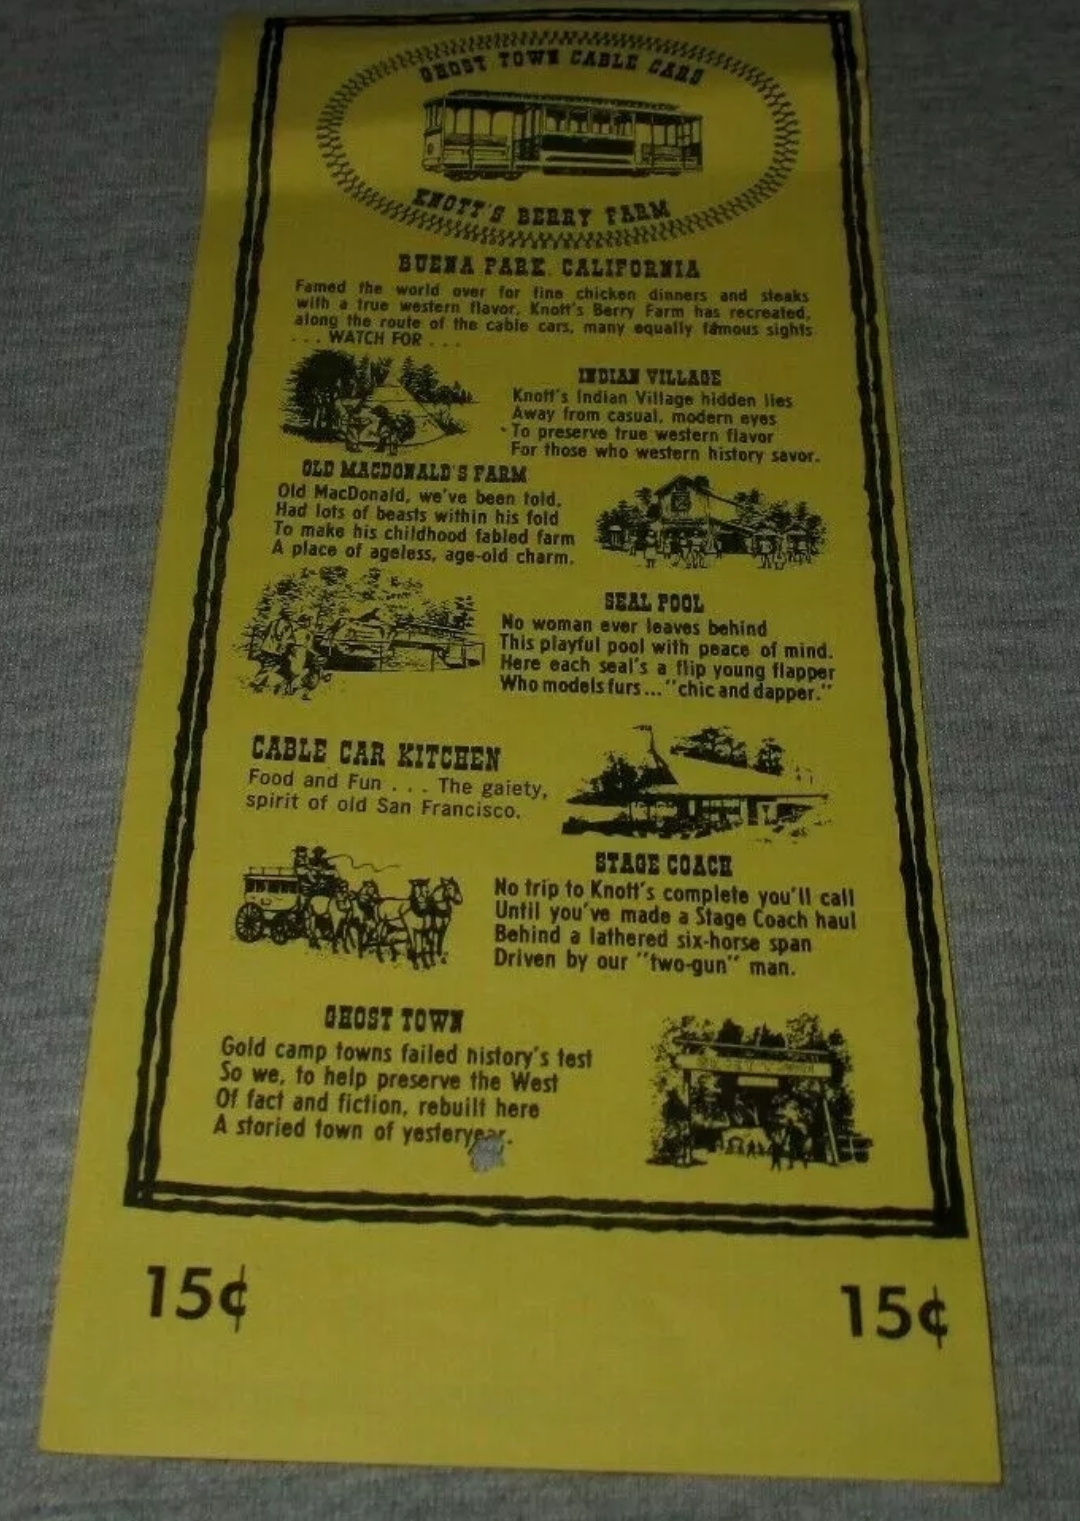 Primary image for Knott's Berry Farm and Ghost Town Cable Car Ticket Buena Park,Califorina 1960's